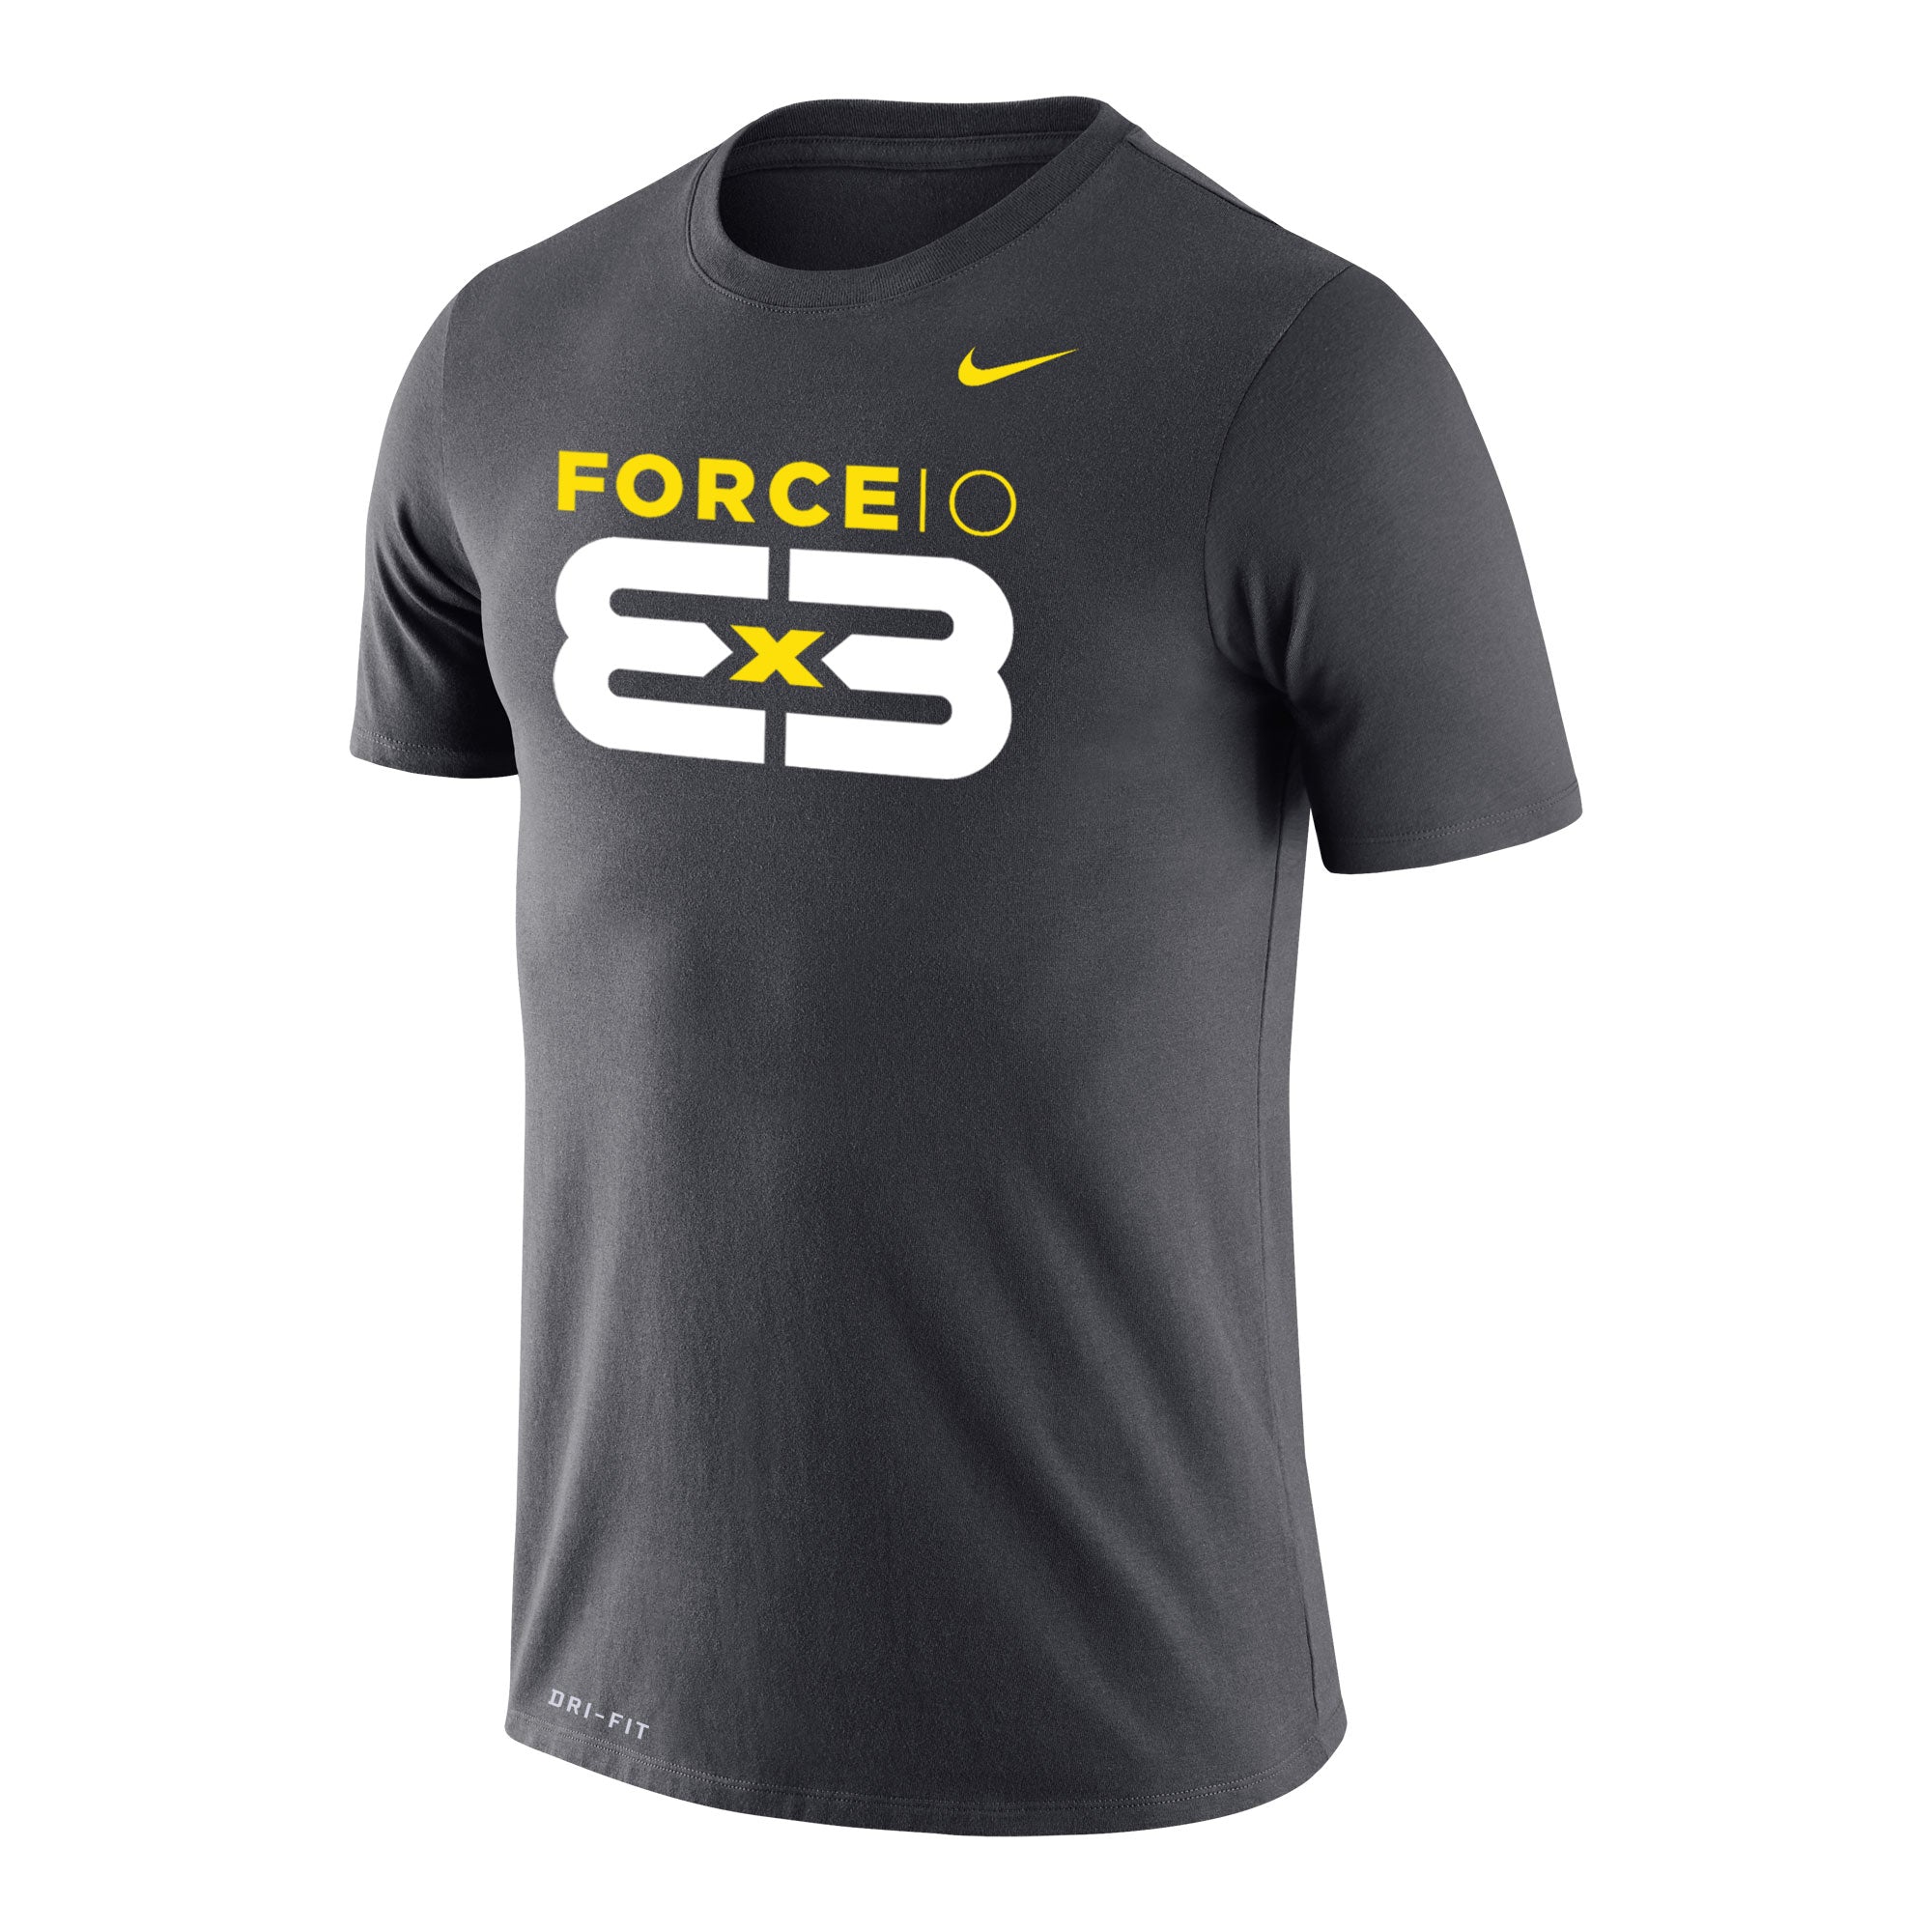 Force 10 3X3 Dri-FIT tee anthracite